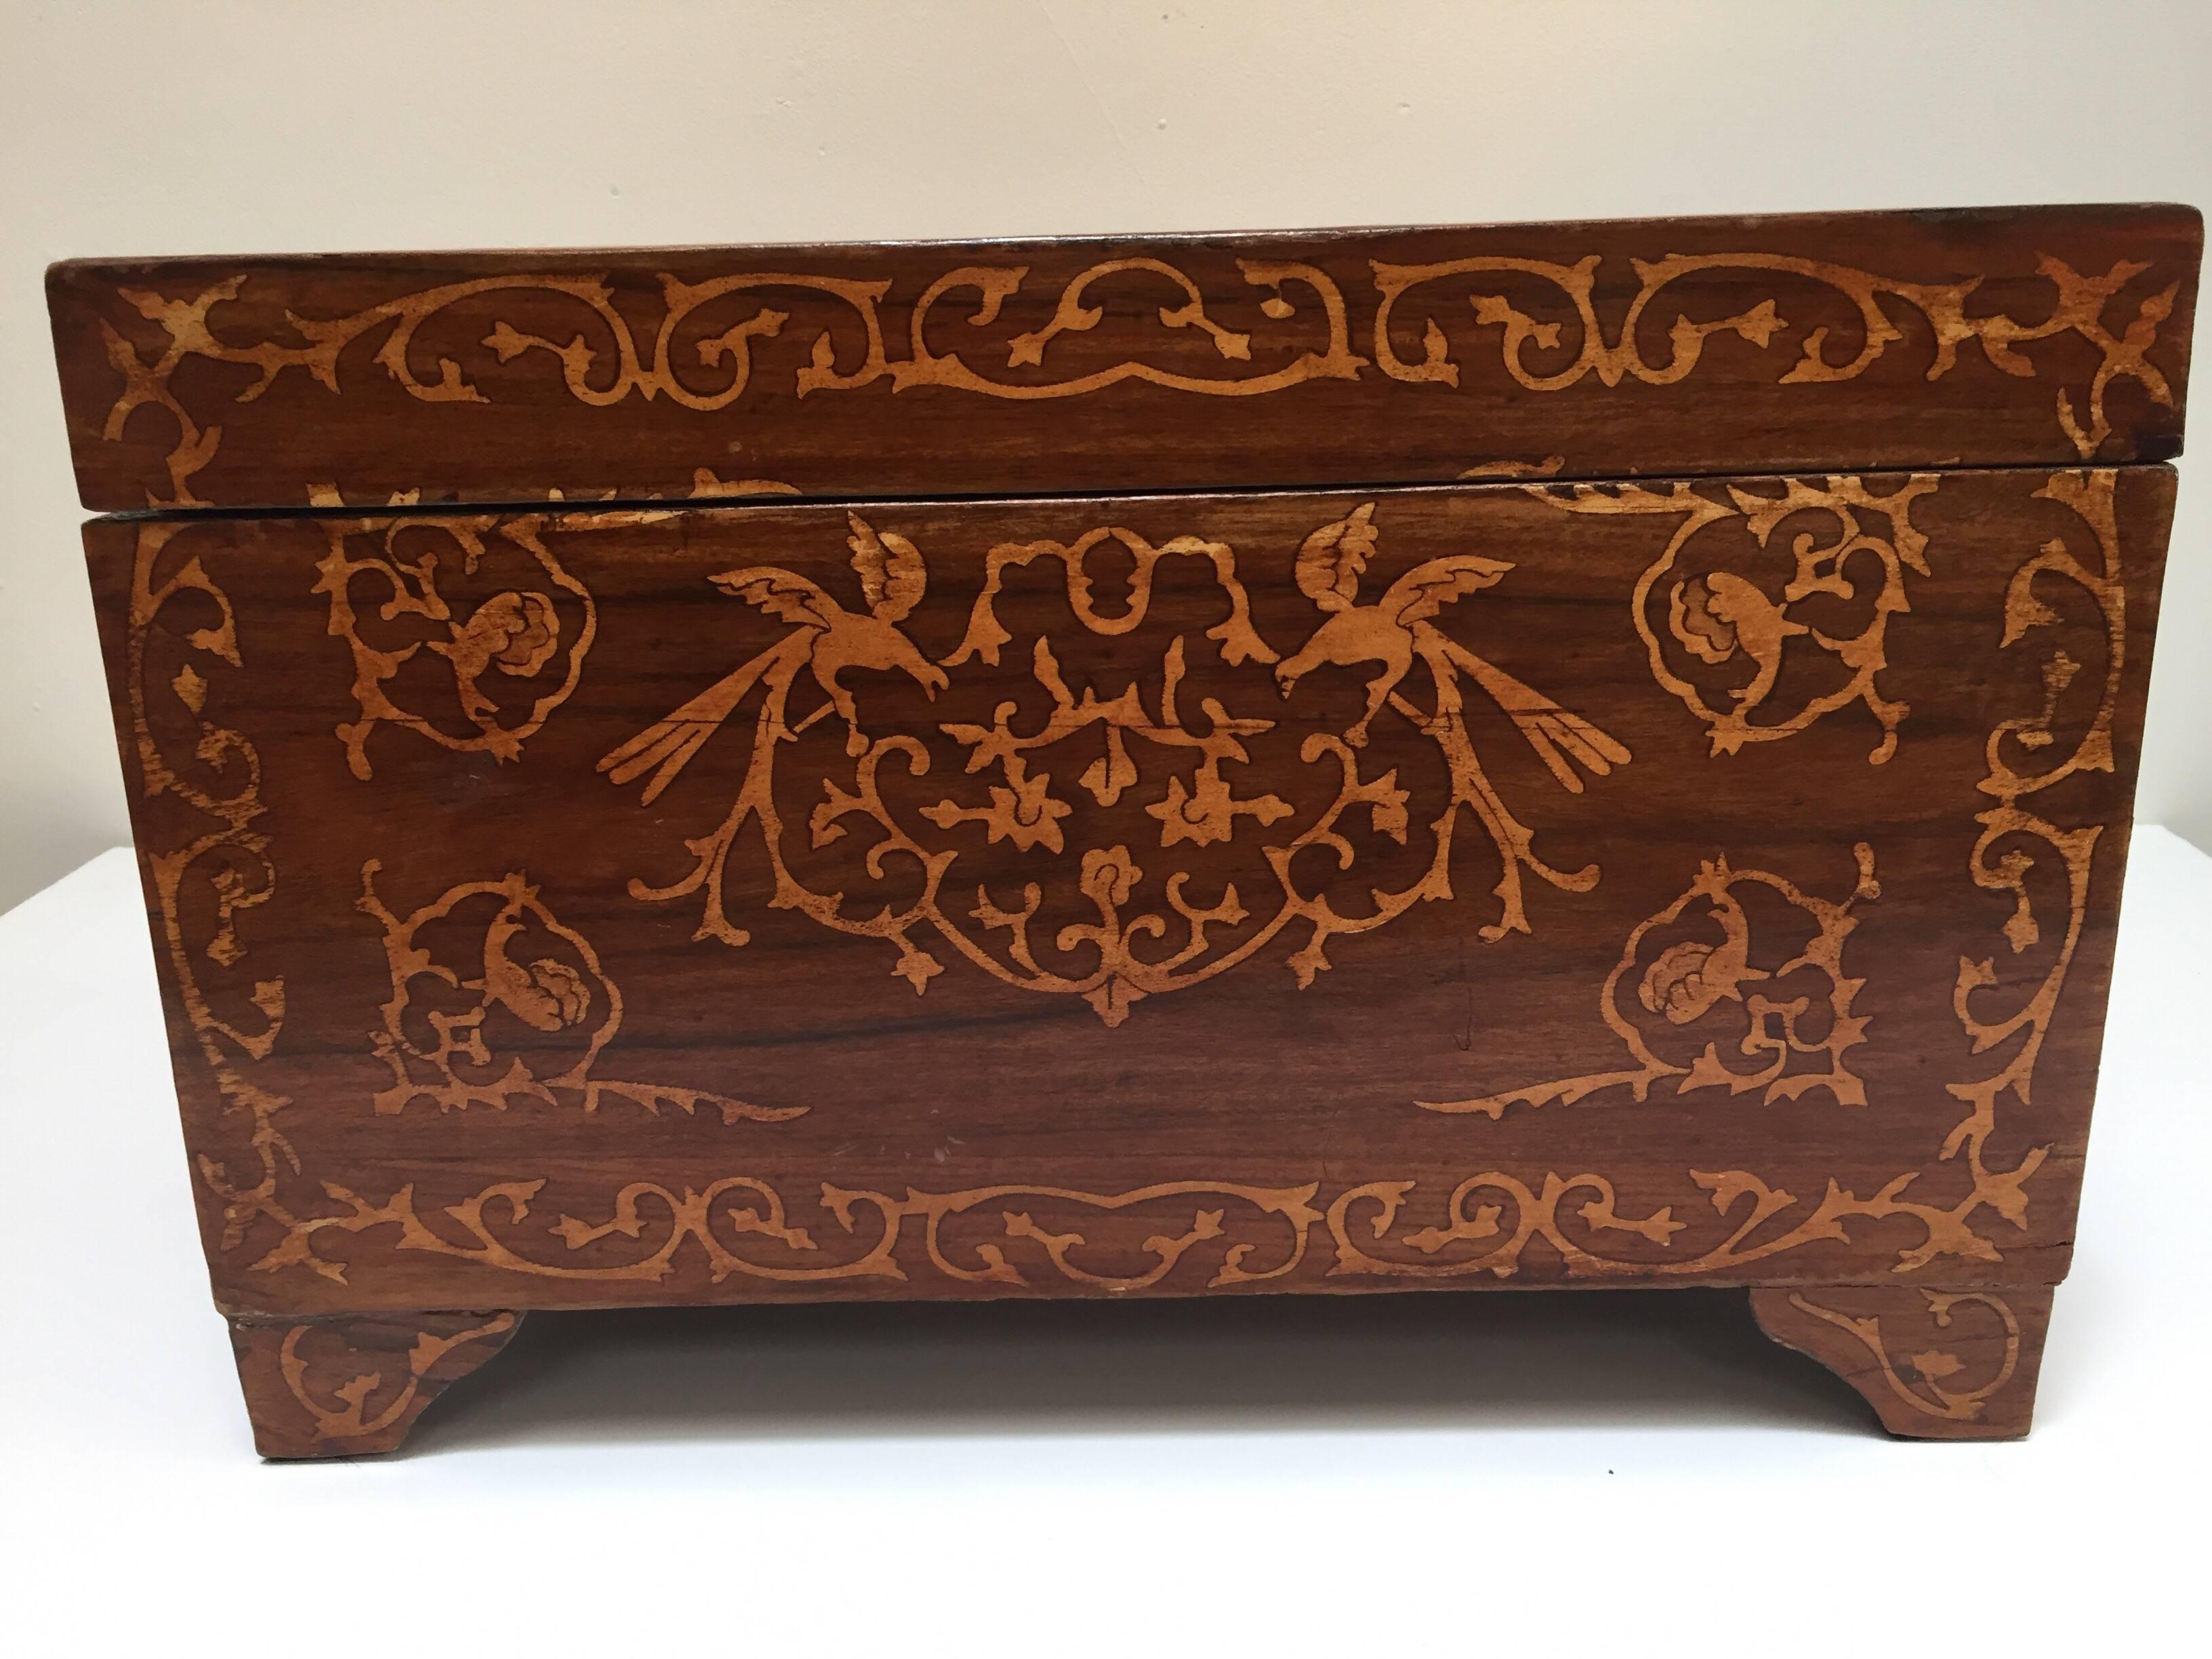 Large Italian box inlaid with precious fruitwood on a rich warm reddish brown wood.
Large wedding chest inlaid with light precious fruitwood of elaborate birds, foliate and floral on all four sides.
Very decorative, large desirable collector piece